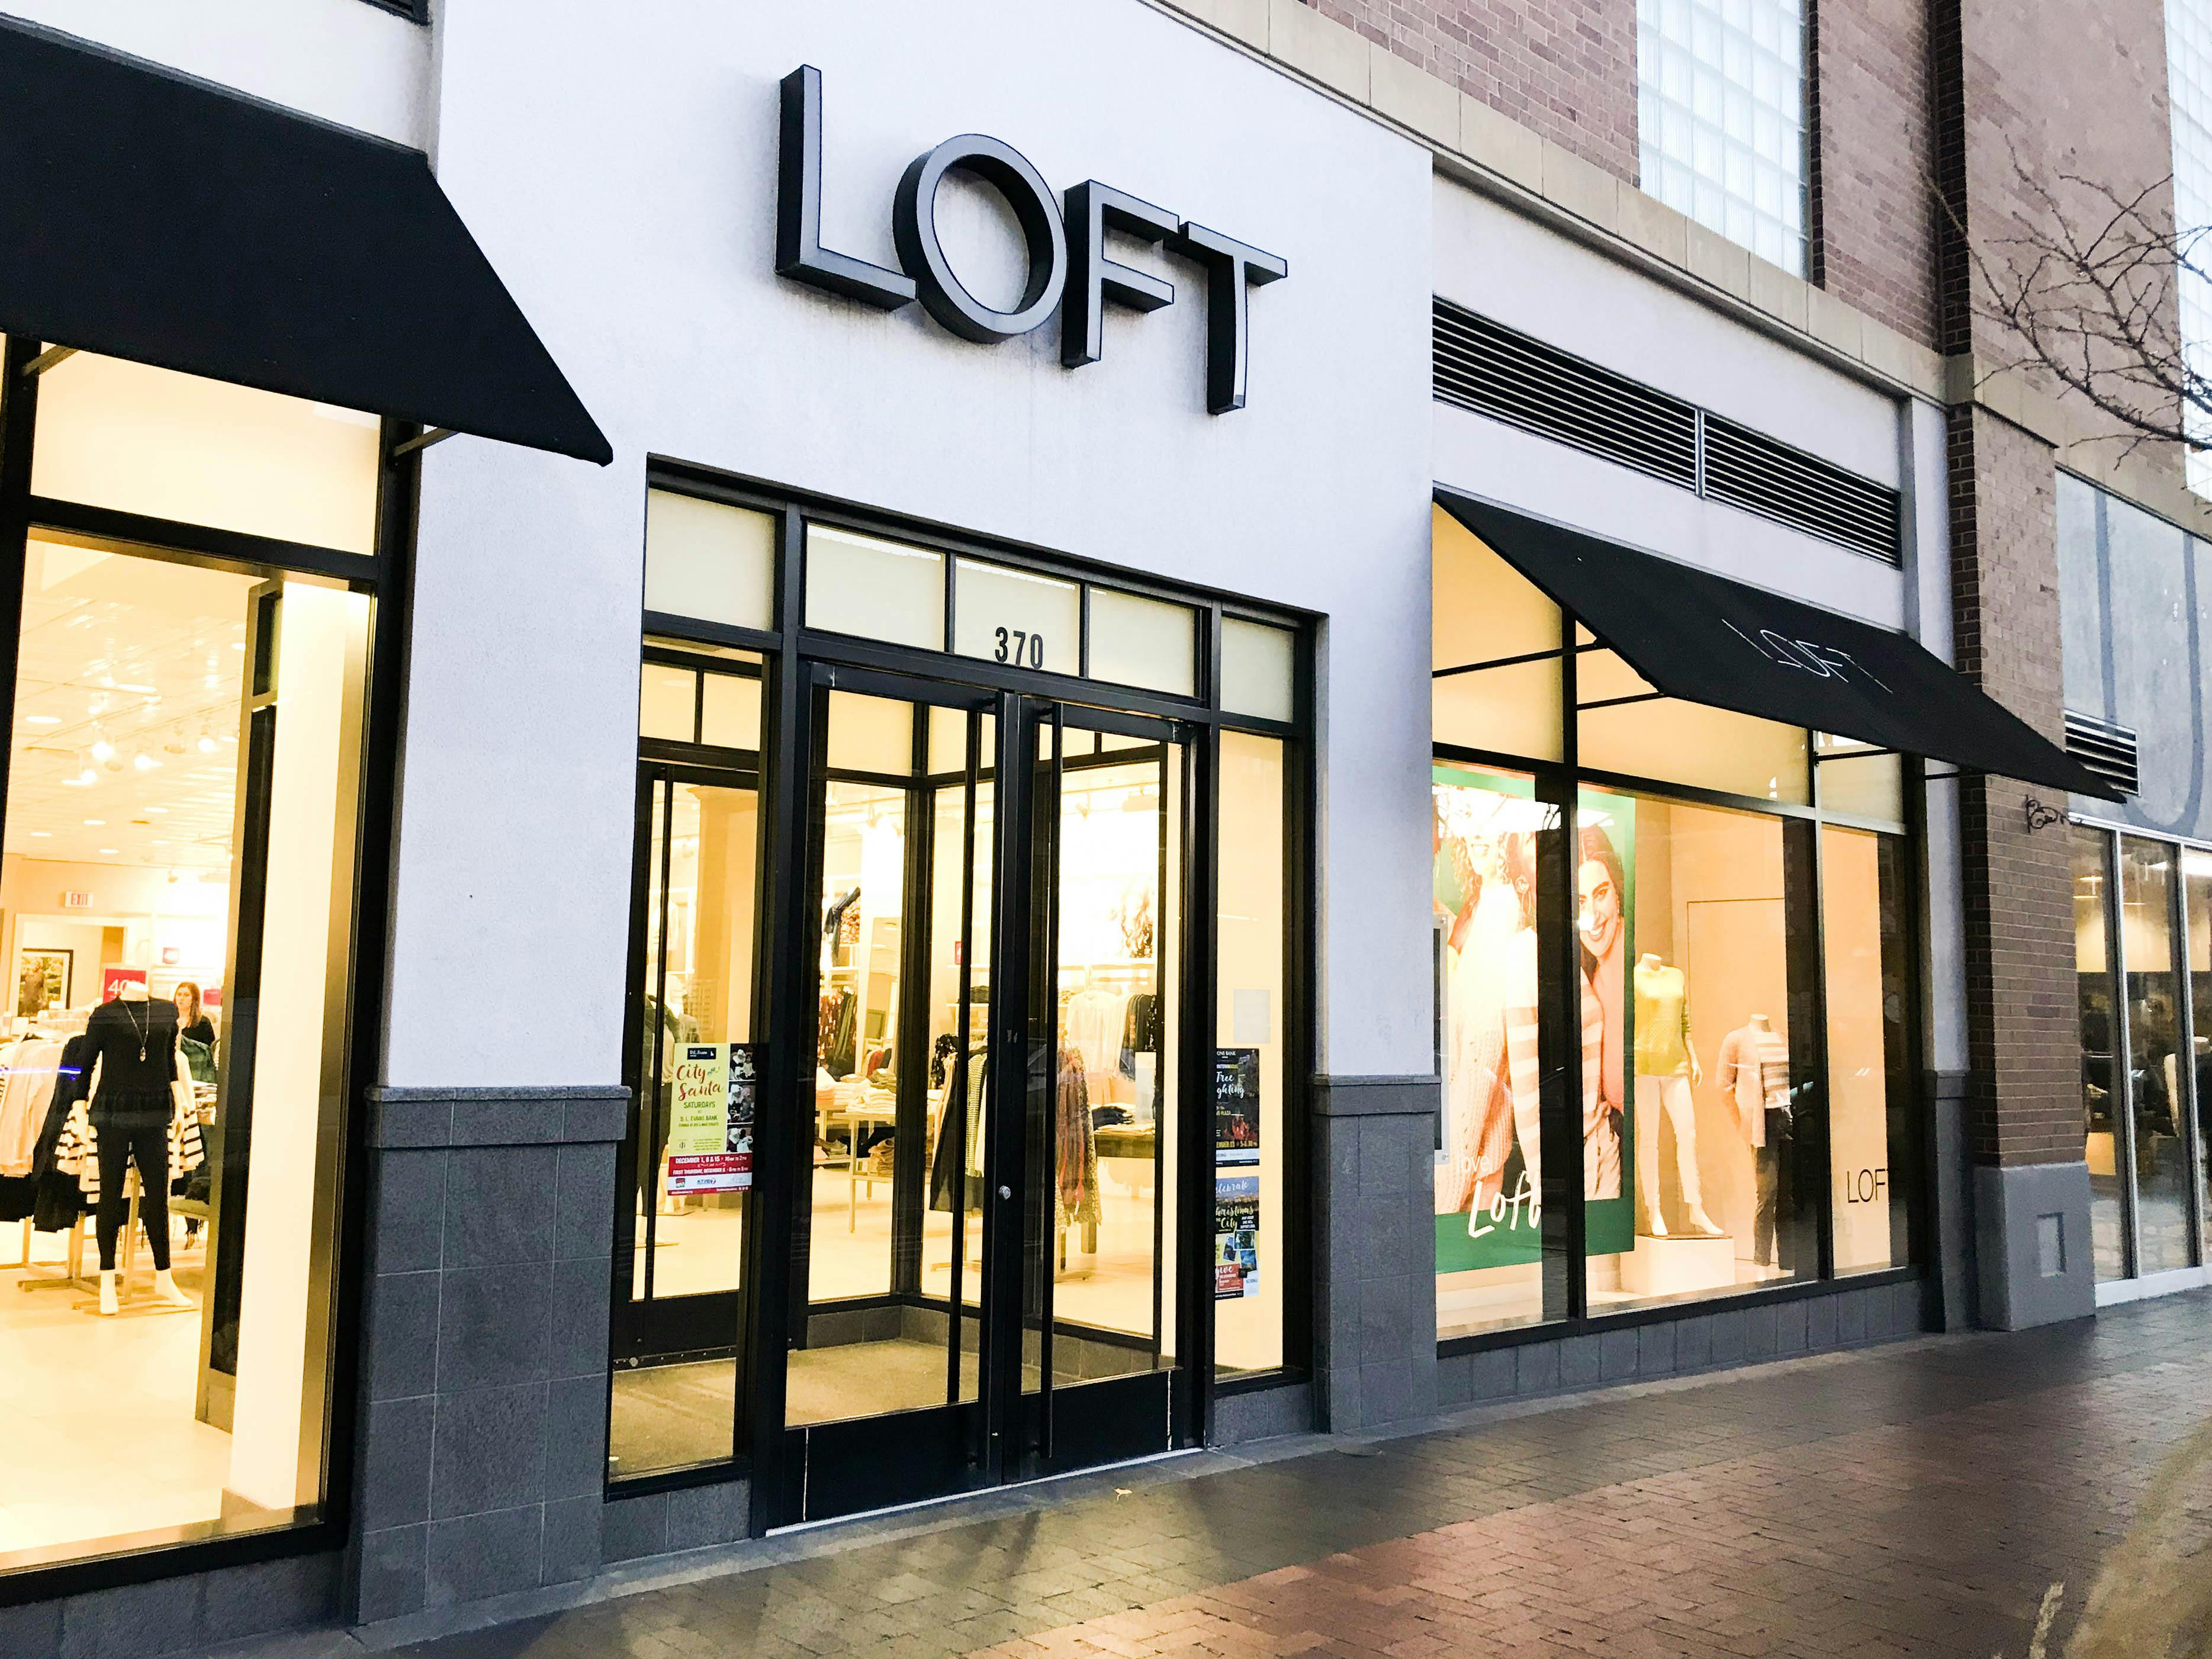 20 Simple Steps to Shop at LOFT - The Krazy Coupon Lady